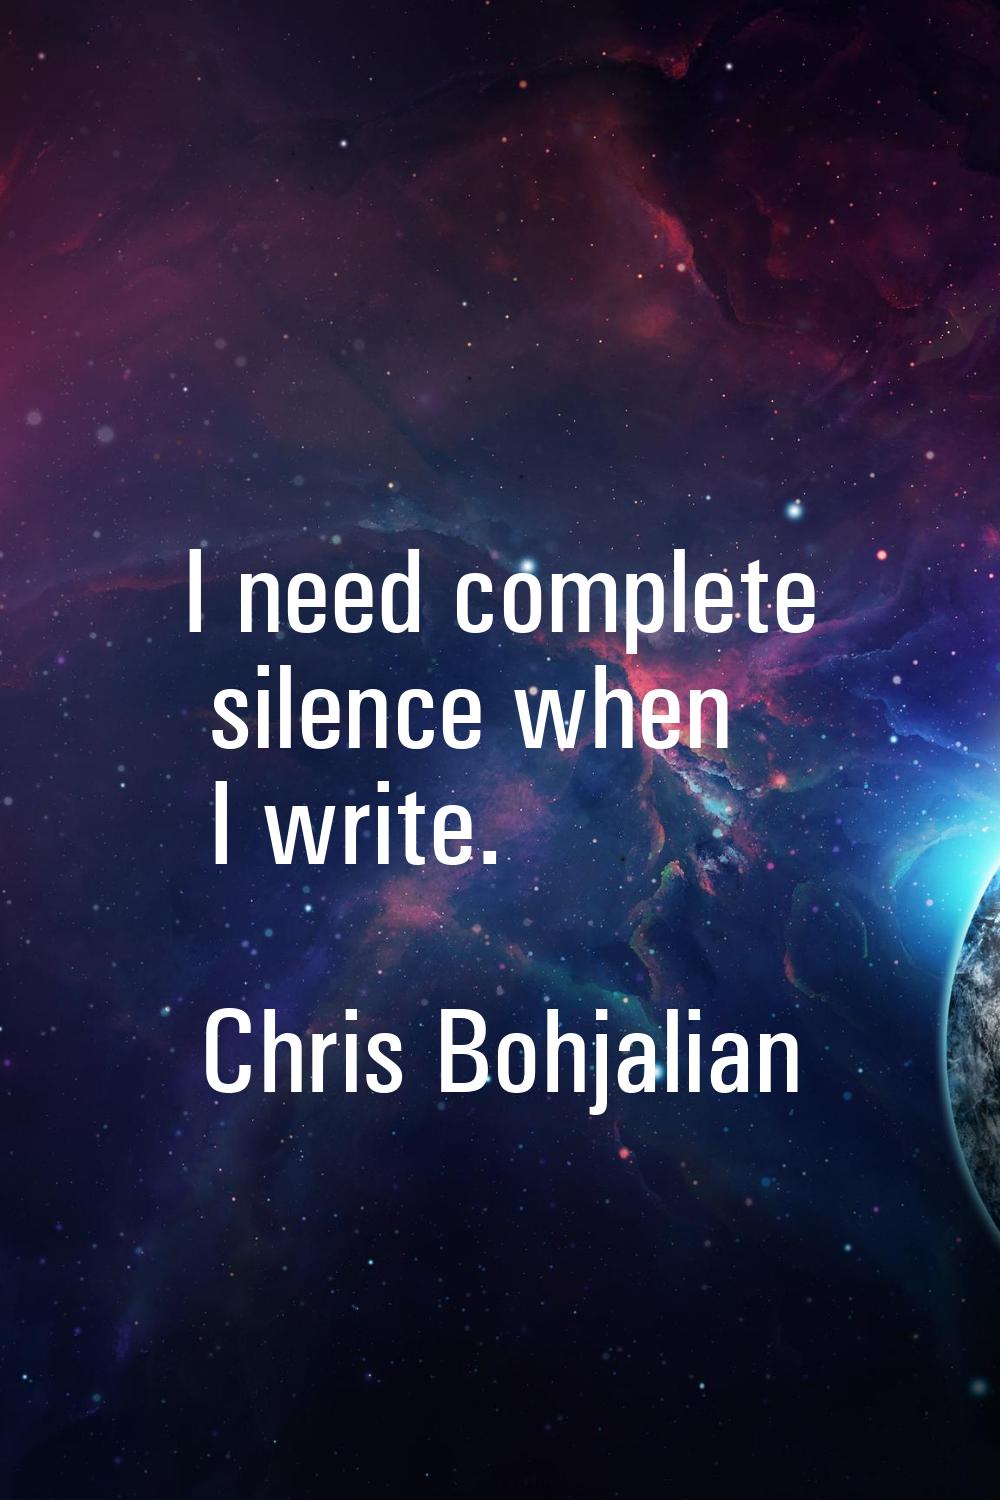 I need complete silence when I write.